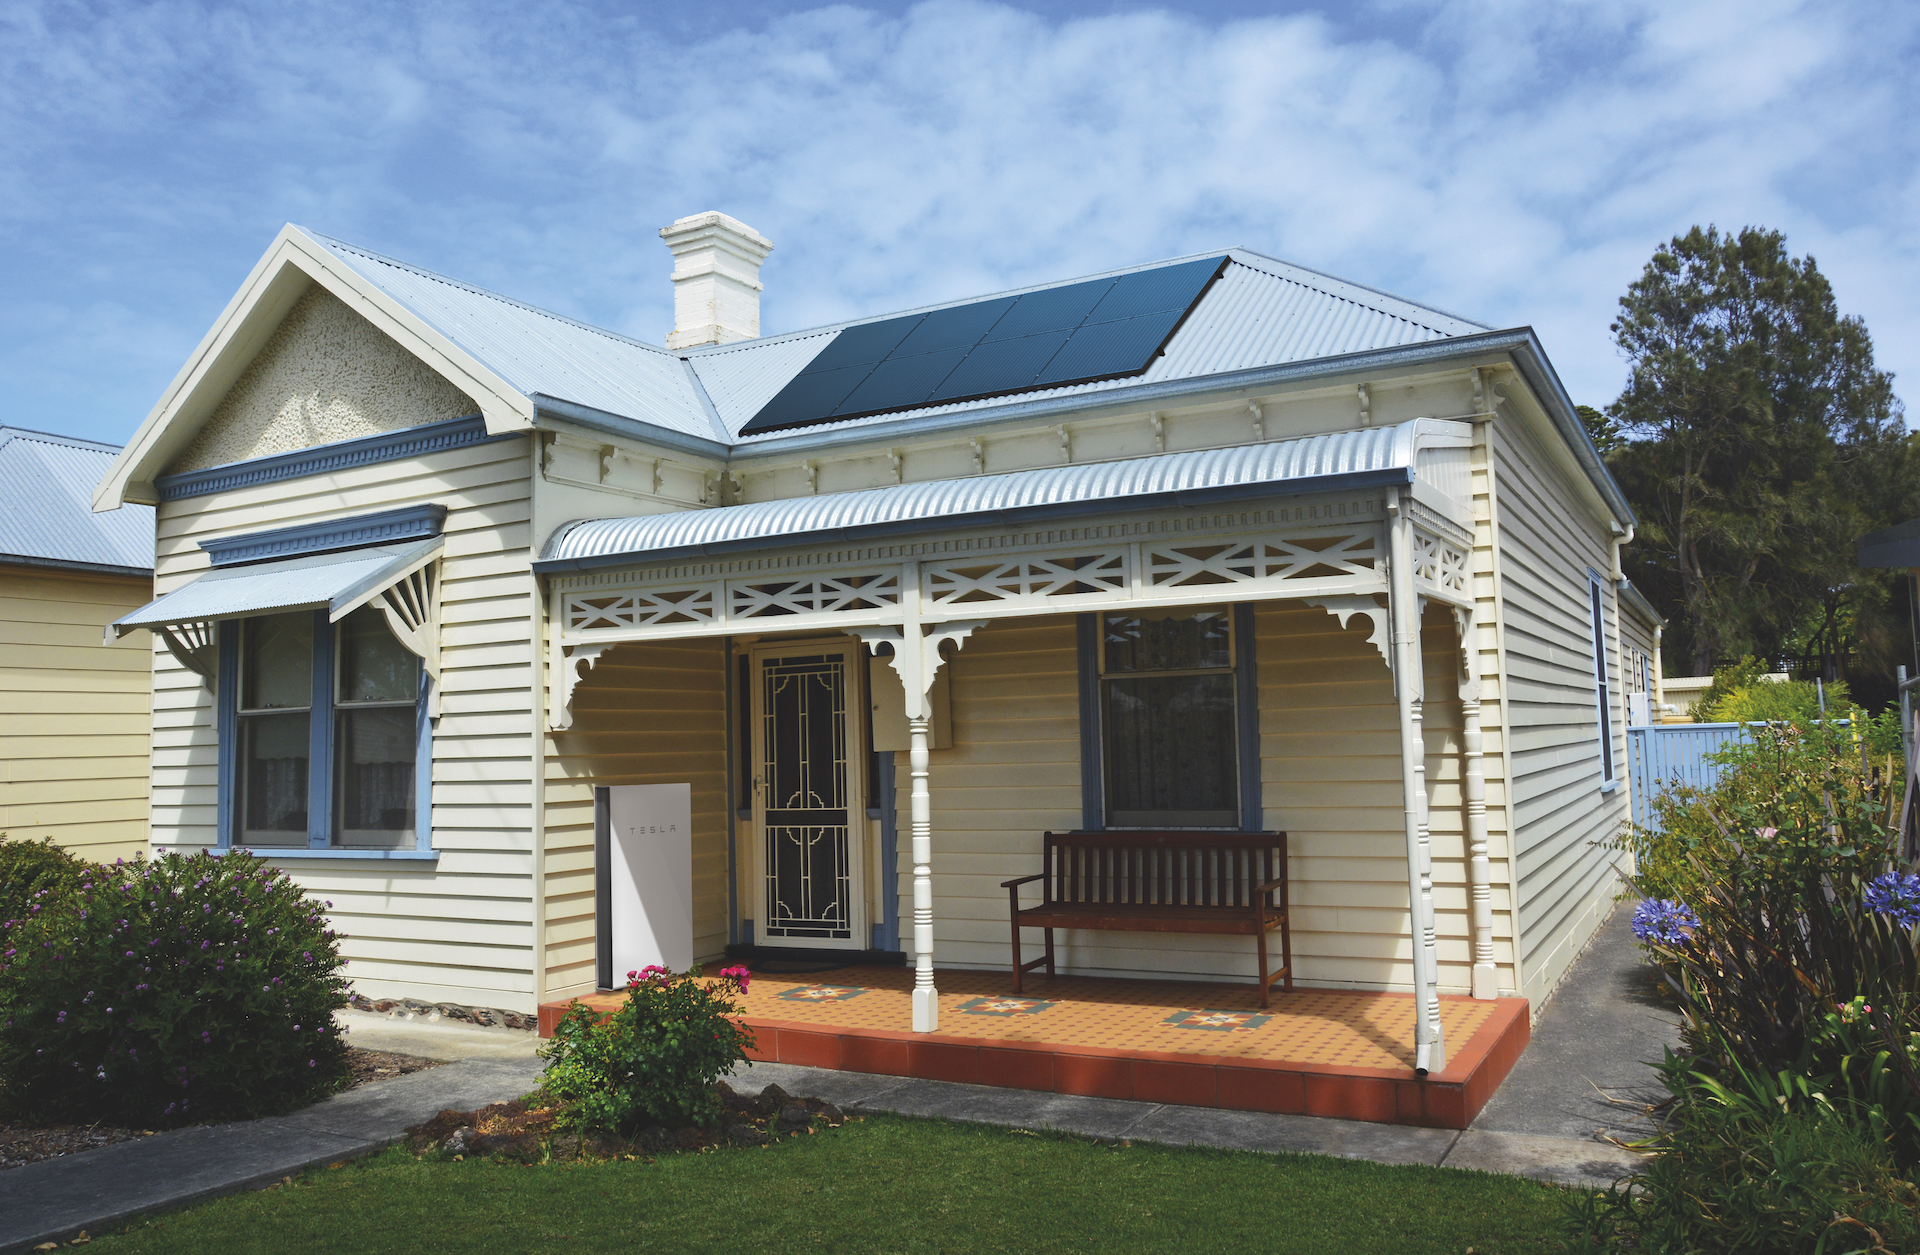 Historical cottage in Australia with solar panels on the roof and Tesla powerwall at the entry for the post Sharp advice before buying solar or batteries for your home.